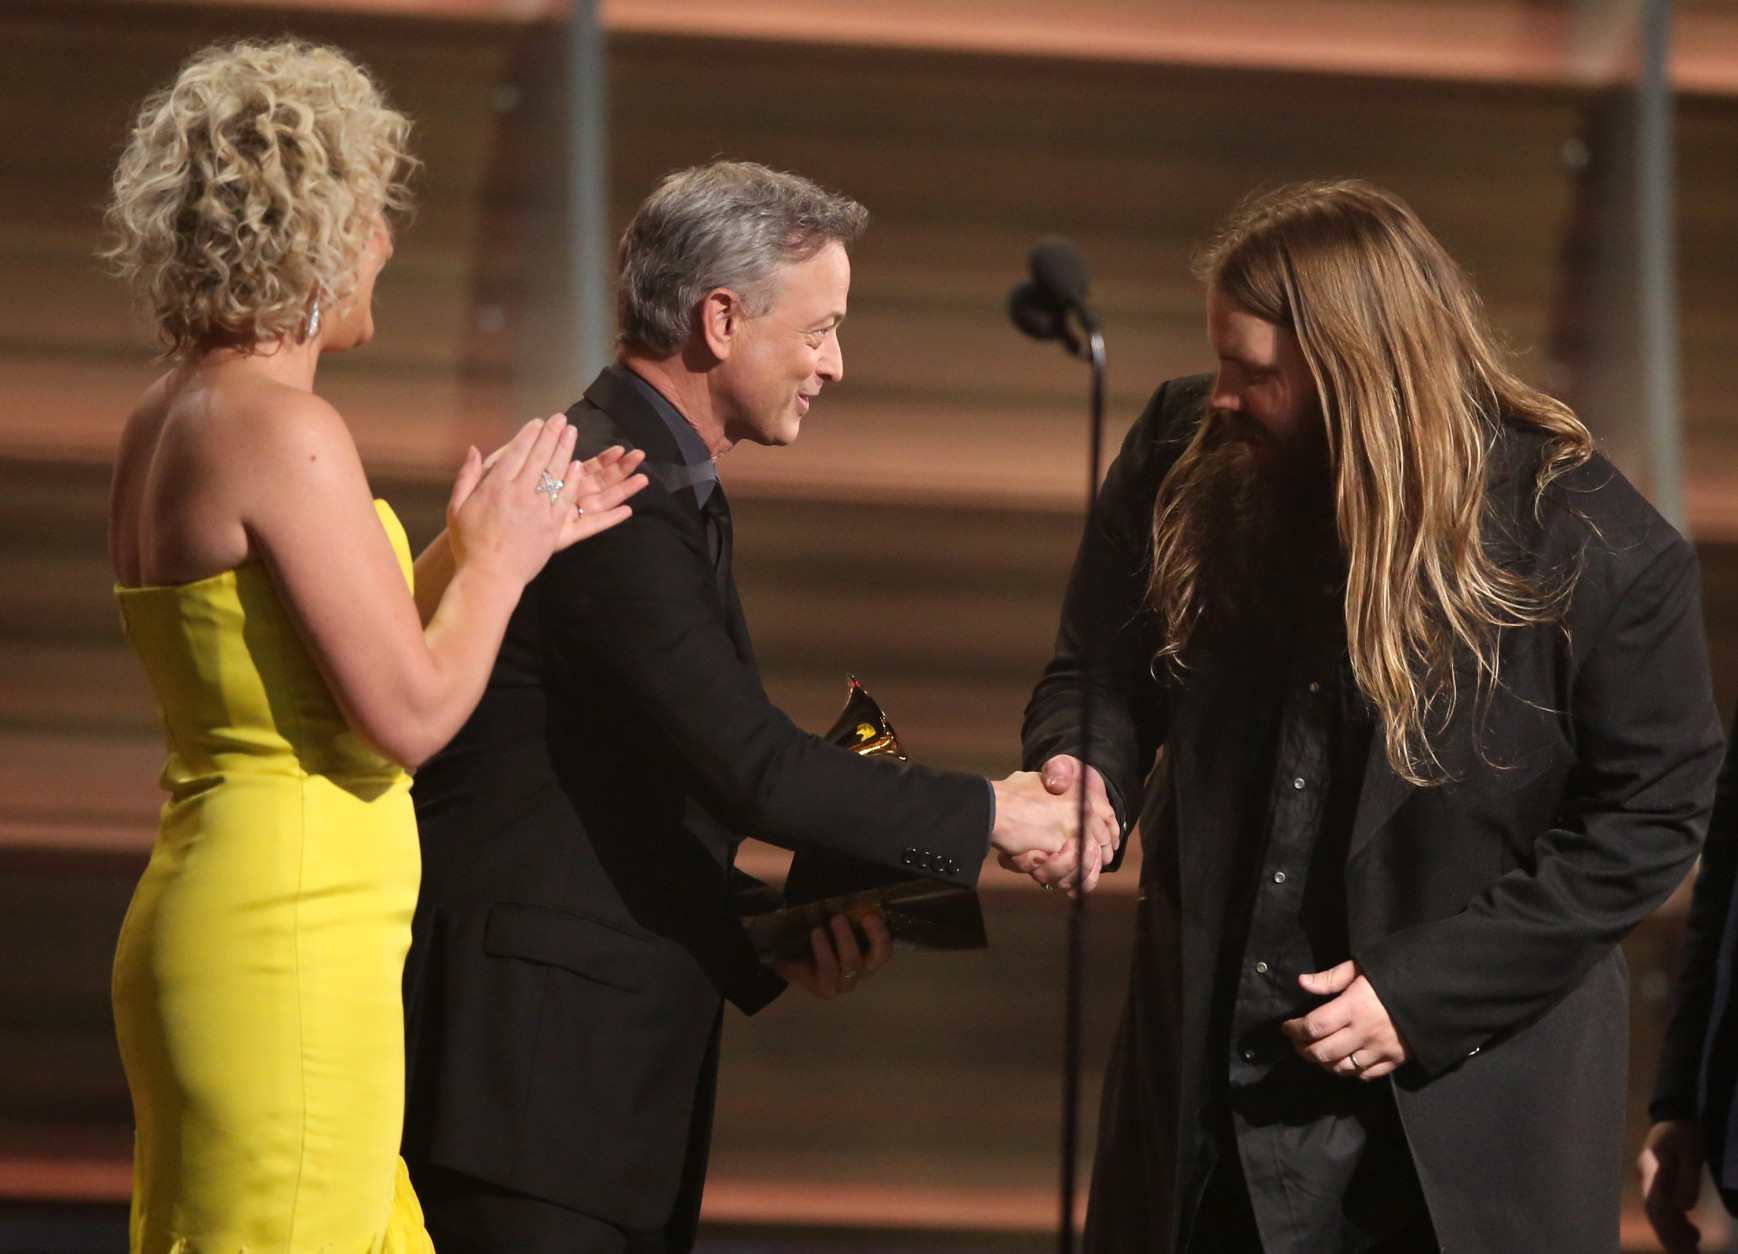 Cam, left, and Gary Sinise present Chris Stapleton with the award for best country album for "Traveller" at the 58th annual Grammy Awards on Monday, Feb. 15, 2016, in Los Angeles. (Photo by Matt Sayles/Invision/AP)